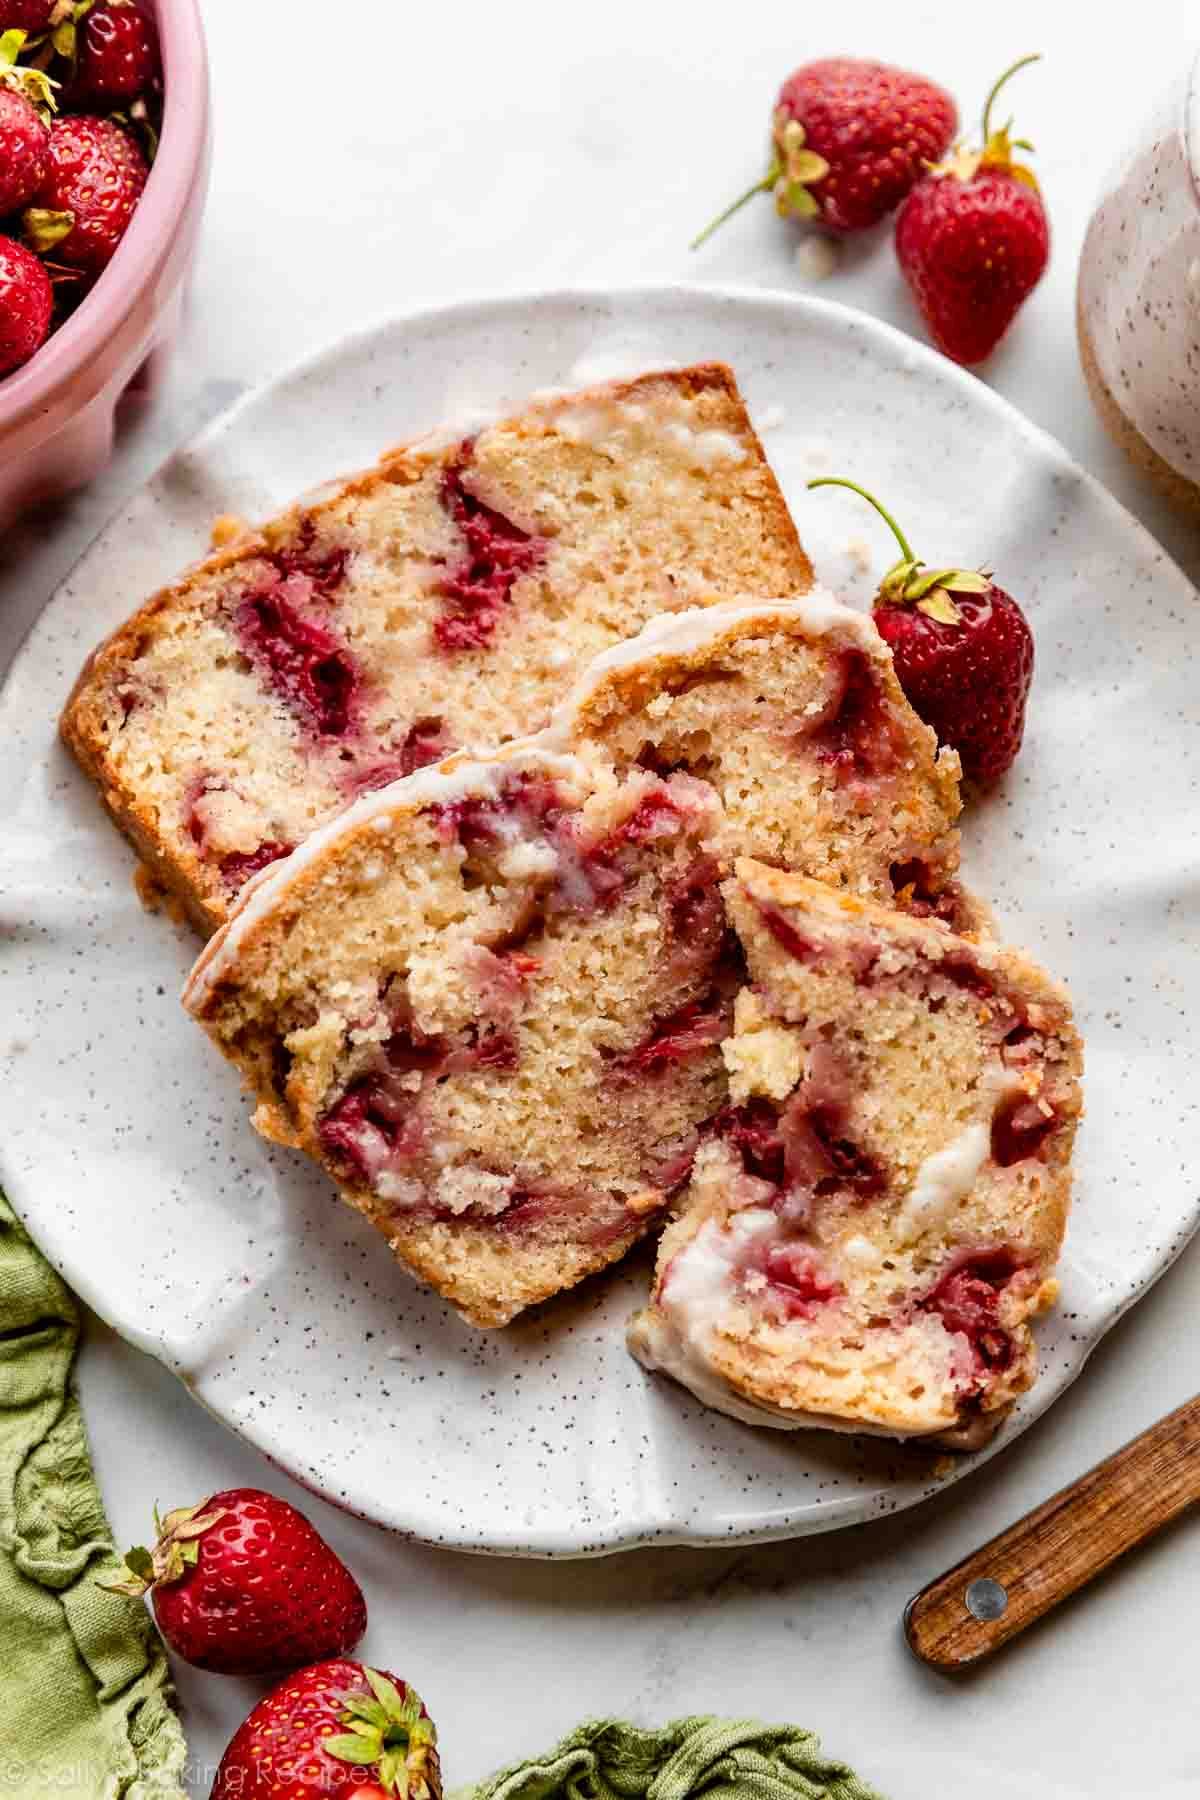 strawberry bread slices on white speckled plate with strawberries around it.